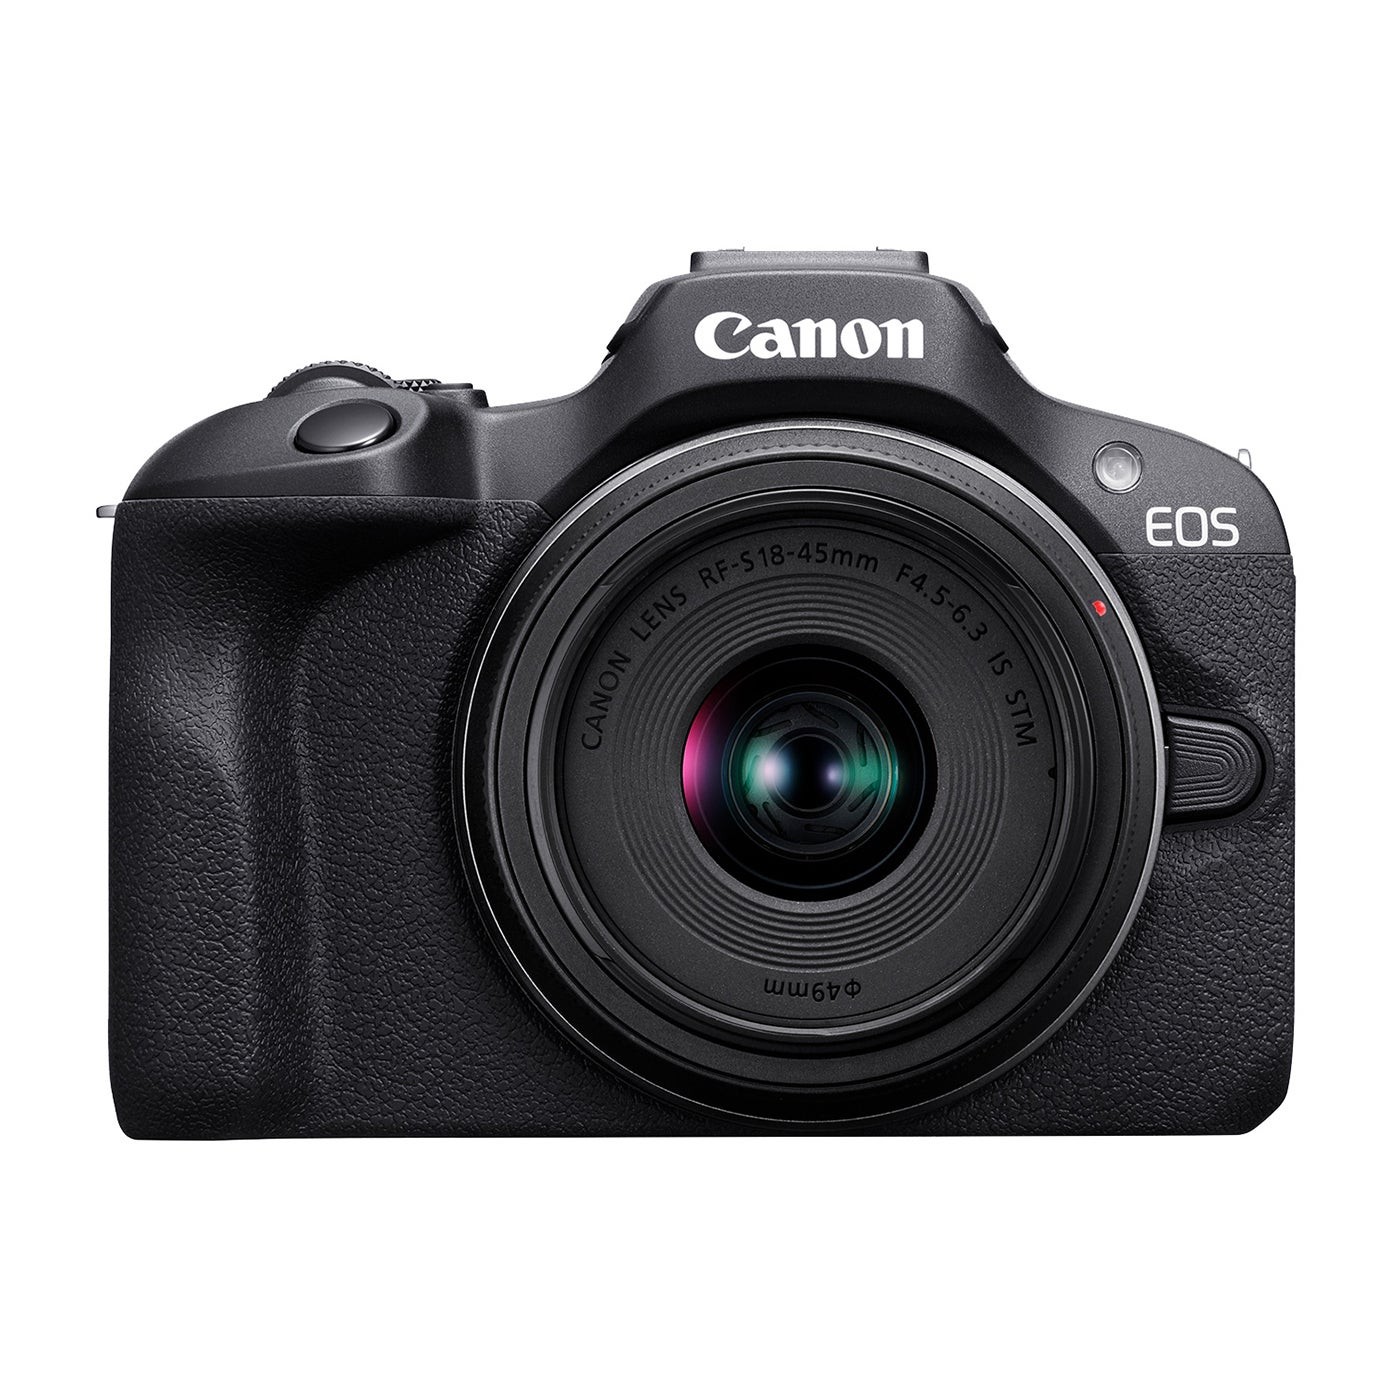 EOS R100 24.1MP 4K Video Mirrorless Camera with RF-S 18-45mm f/4.5-6.3 IS STM Lens